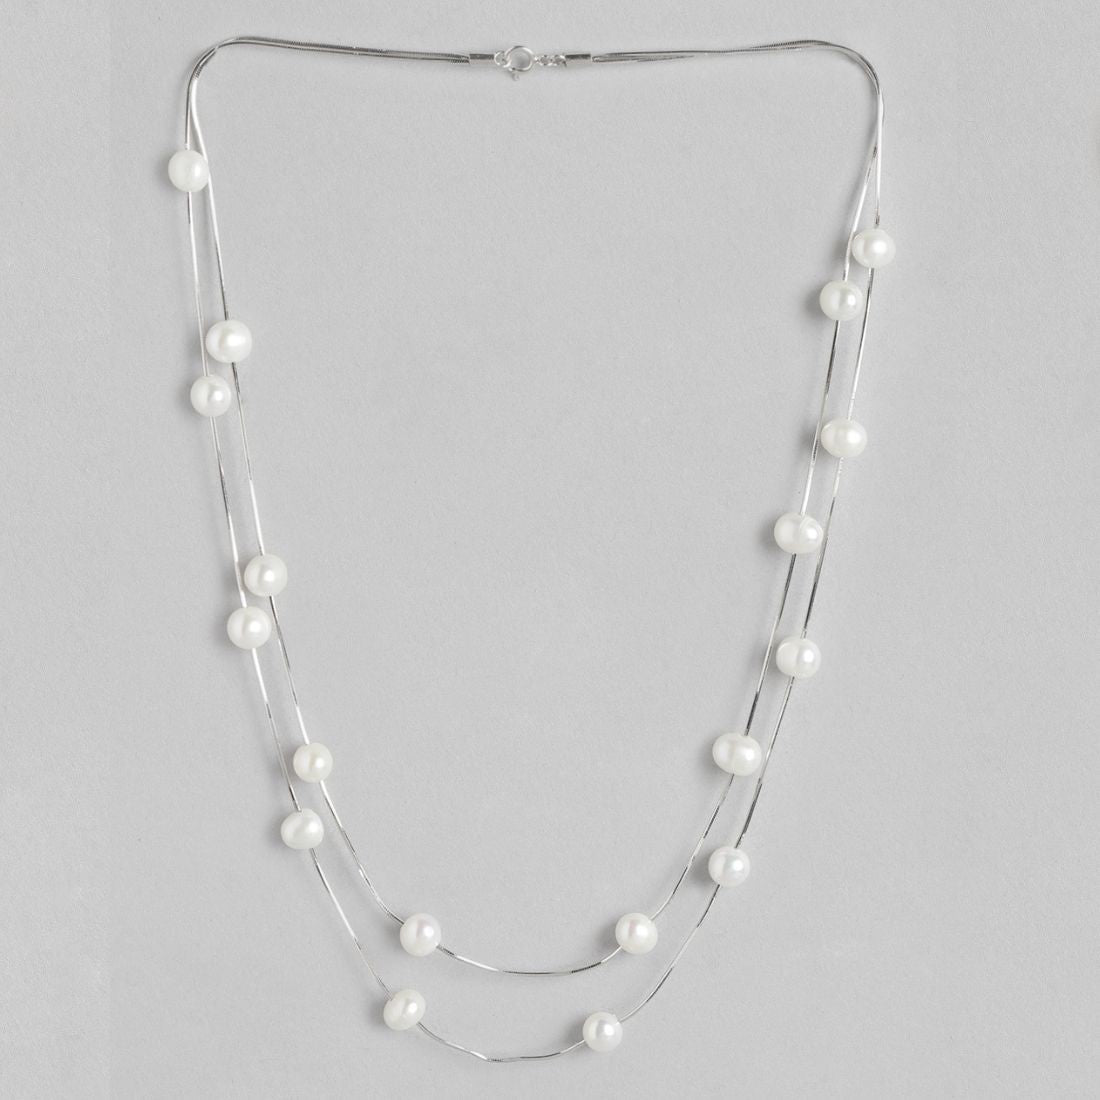 Specs of Pearls Silver 925 Silver Necklace